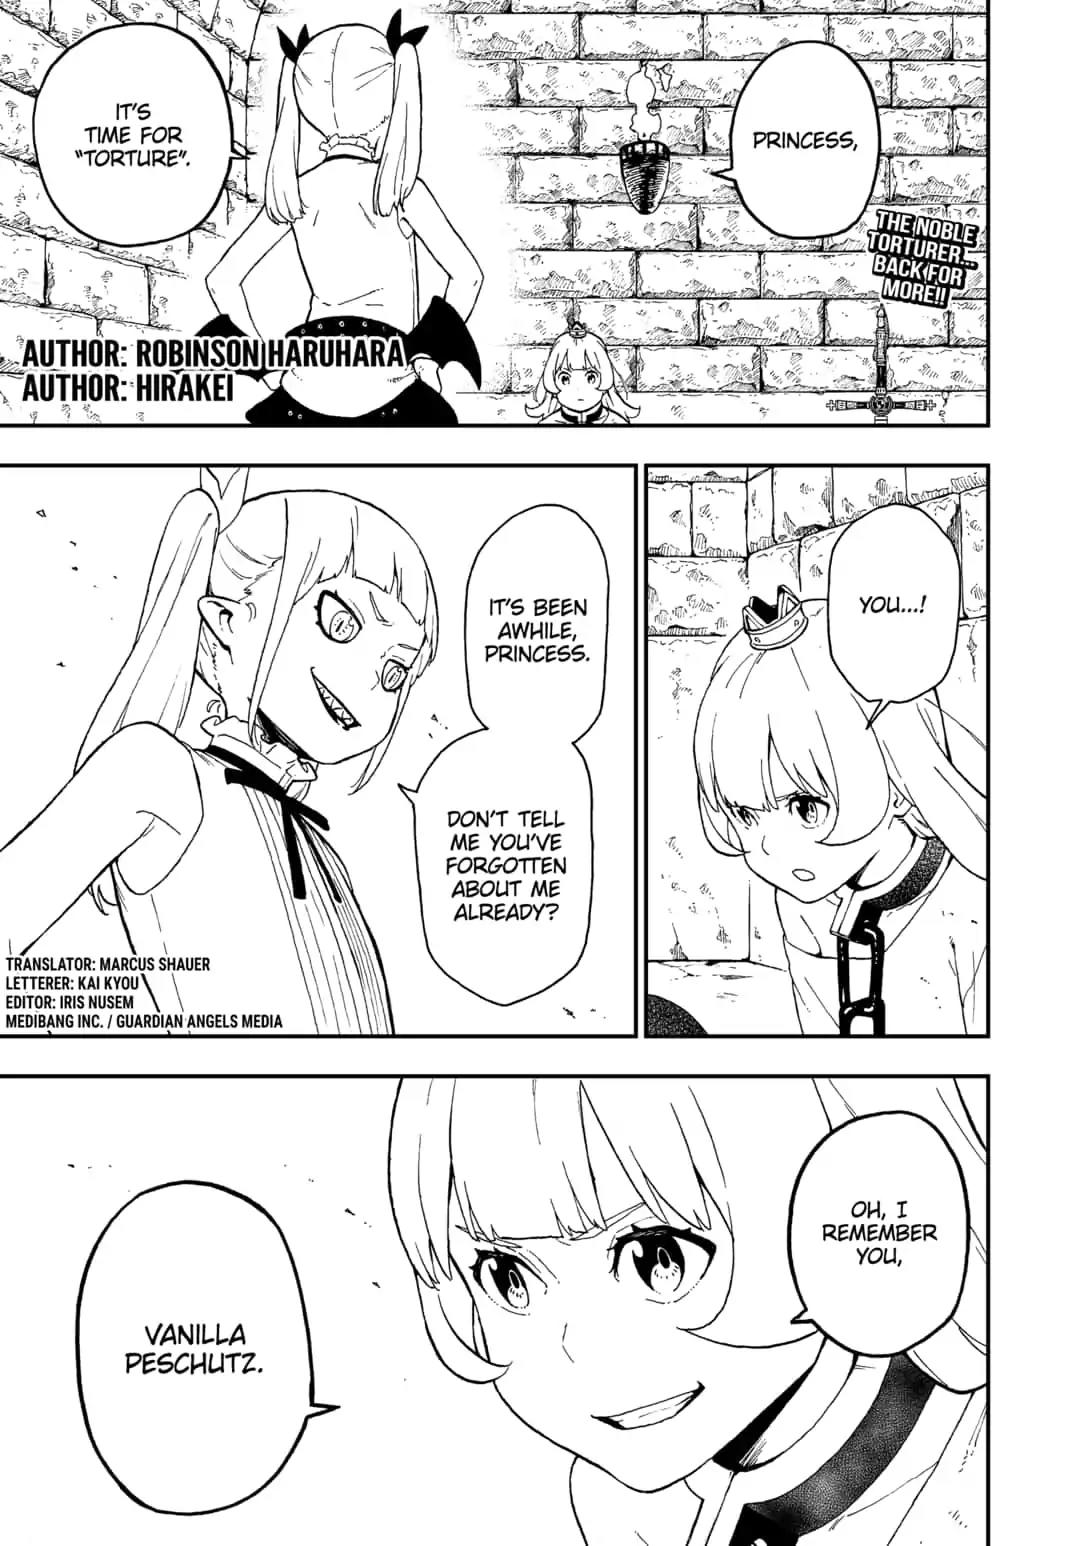 It's Time for "Interrogation," Princess! Chapter 45